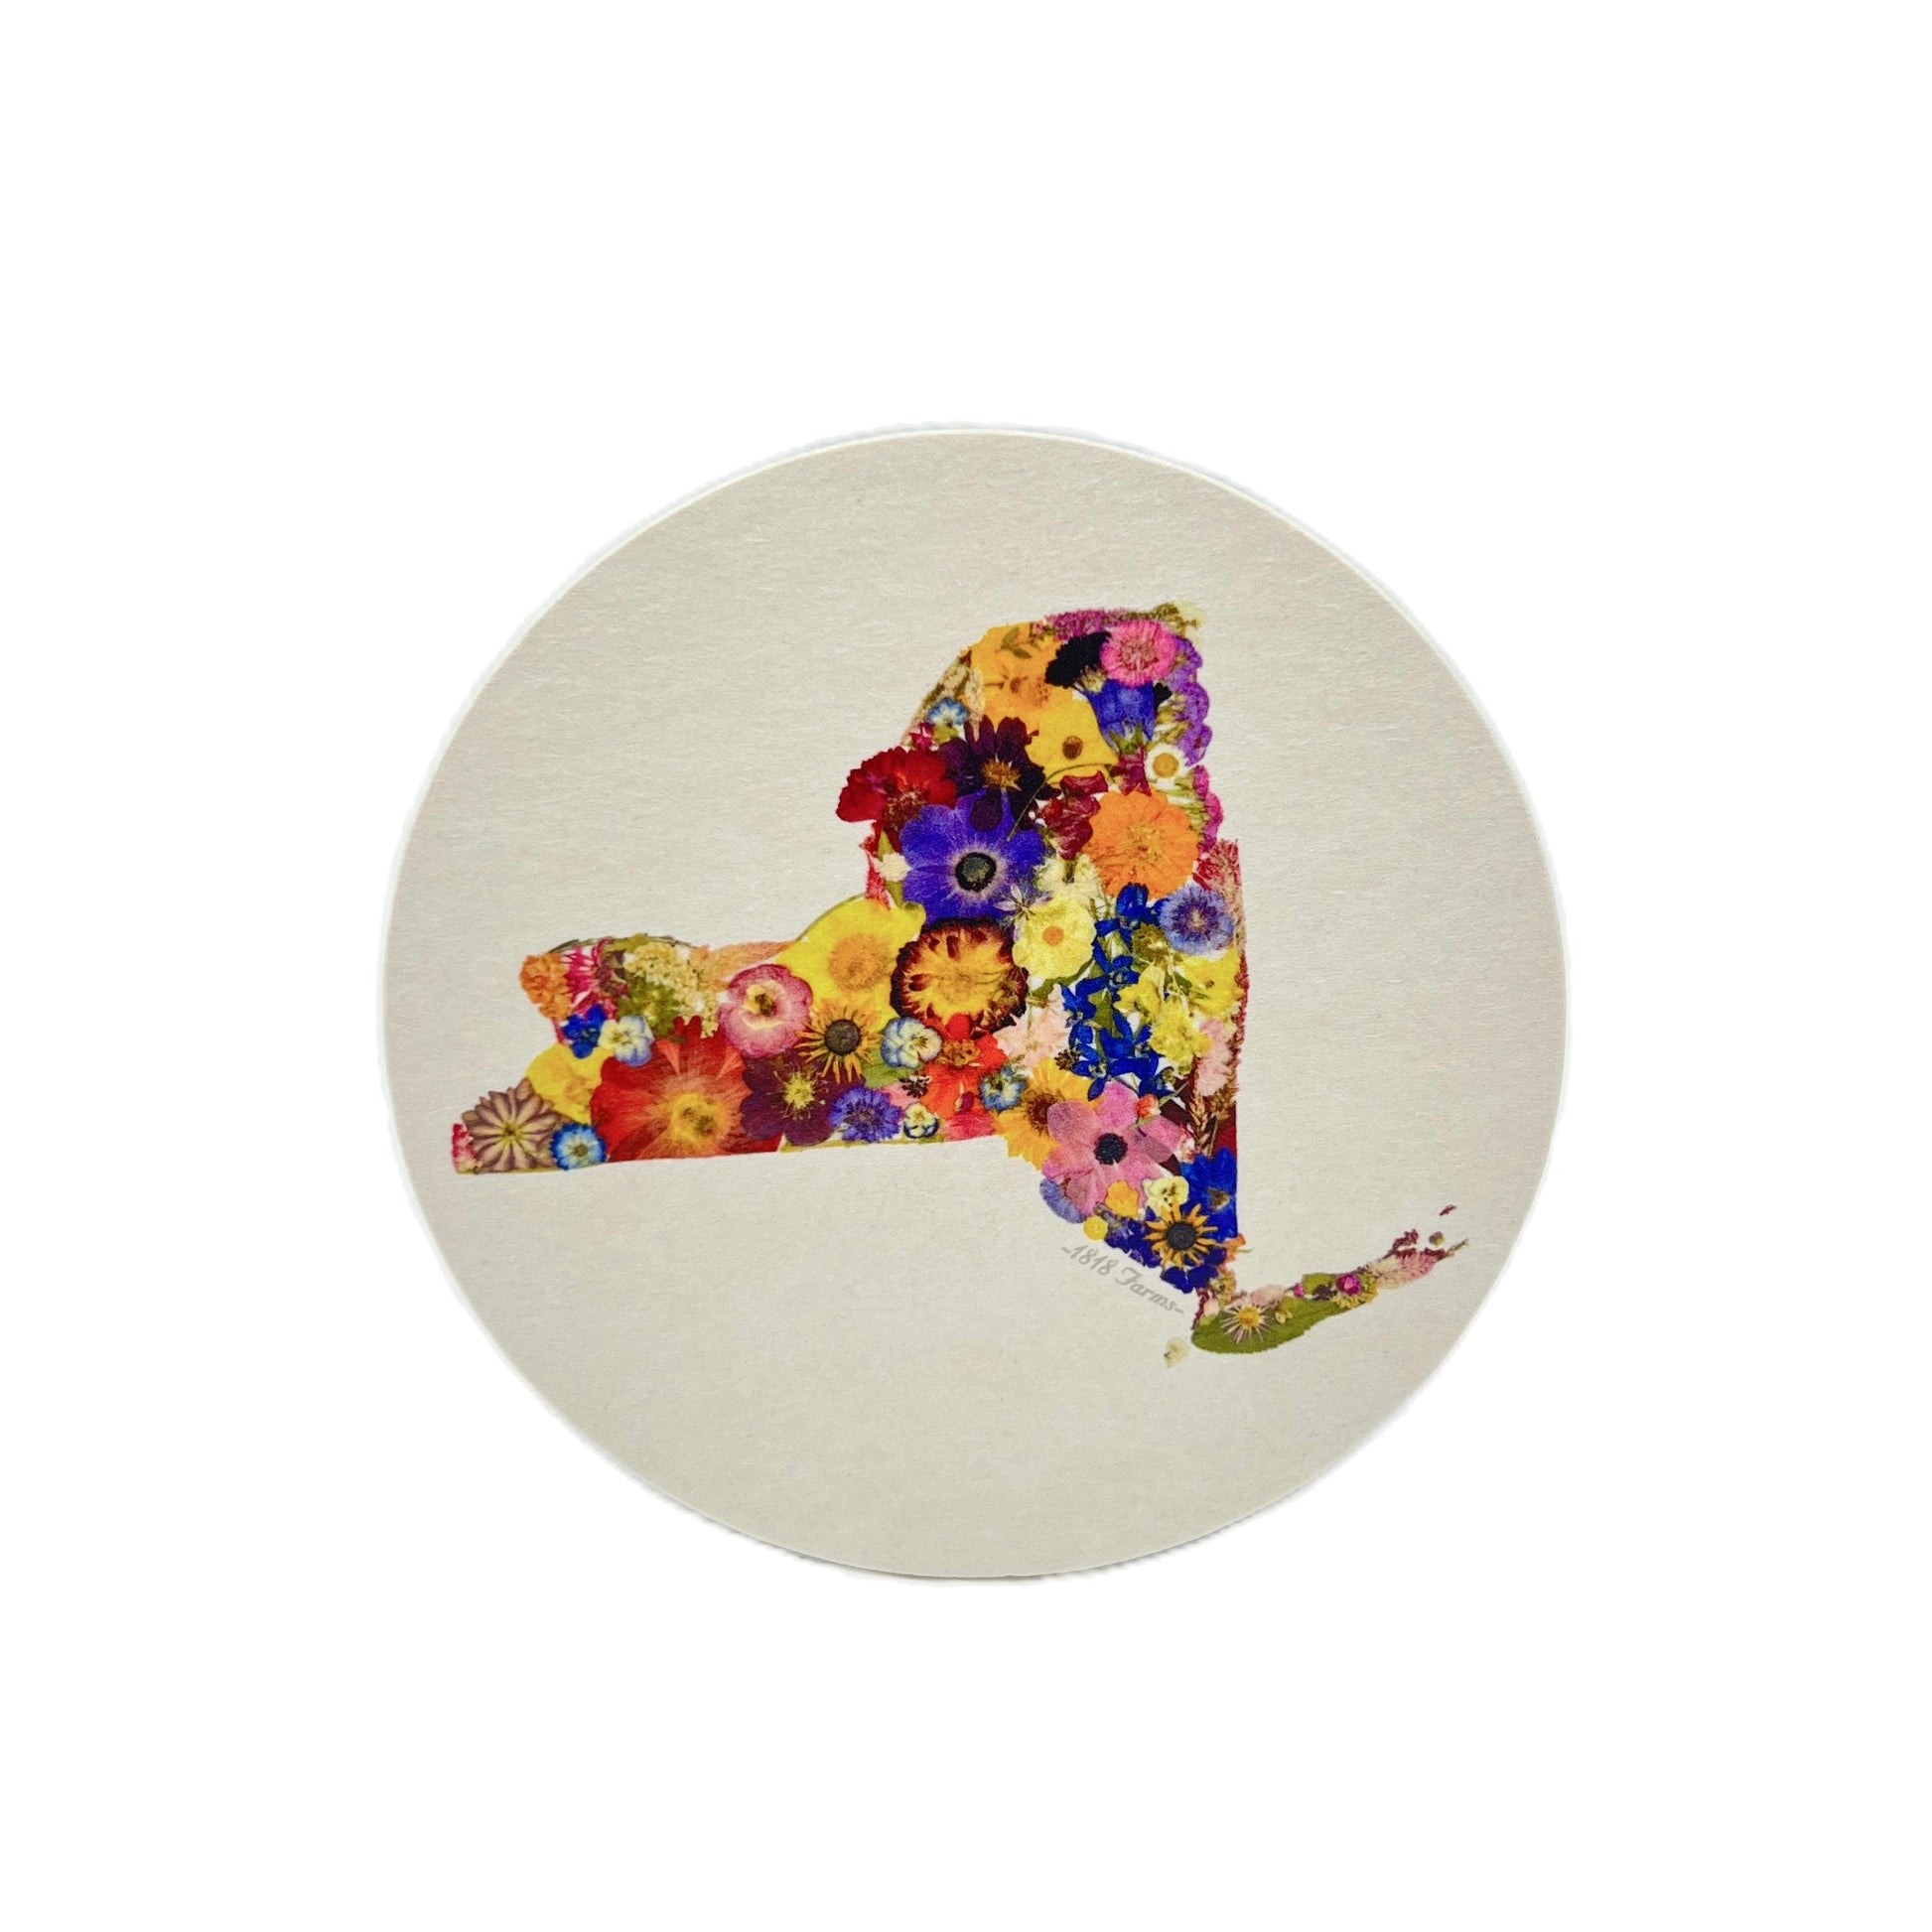 State Themed Drink Coasters (Set of 6)  - "Where I Bloom" Collection Coaster 1818 Farms New York  